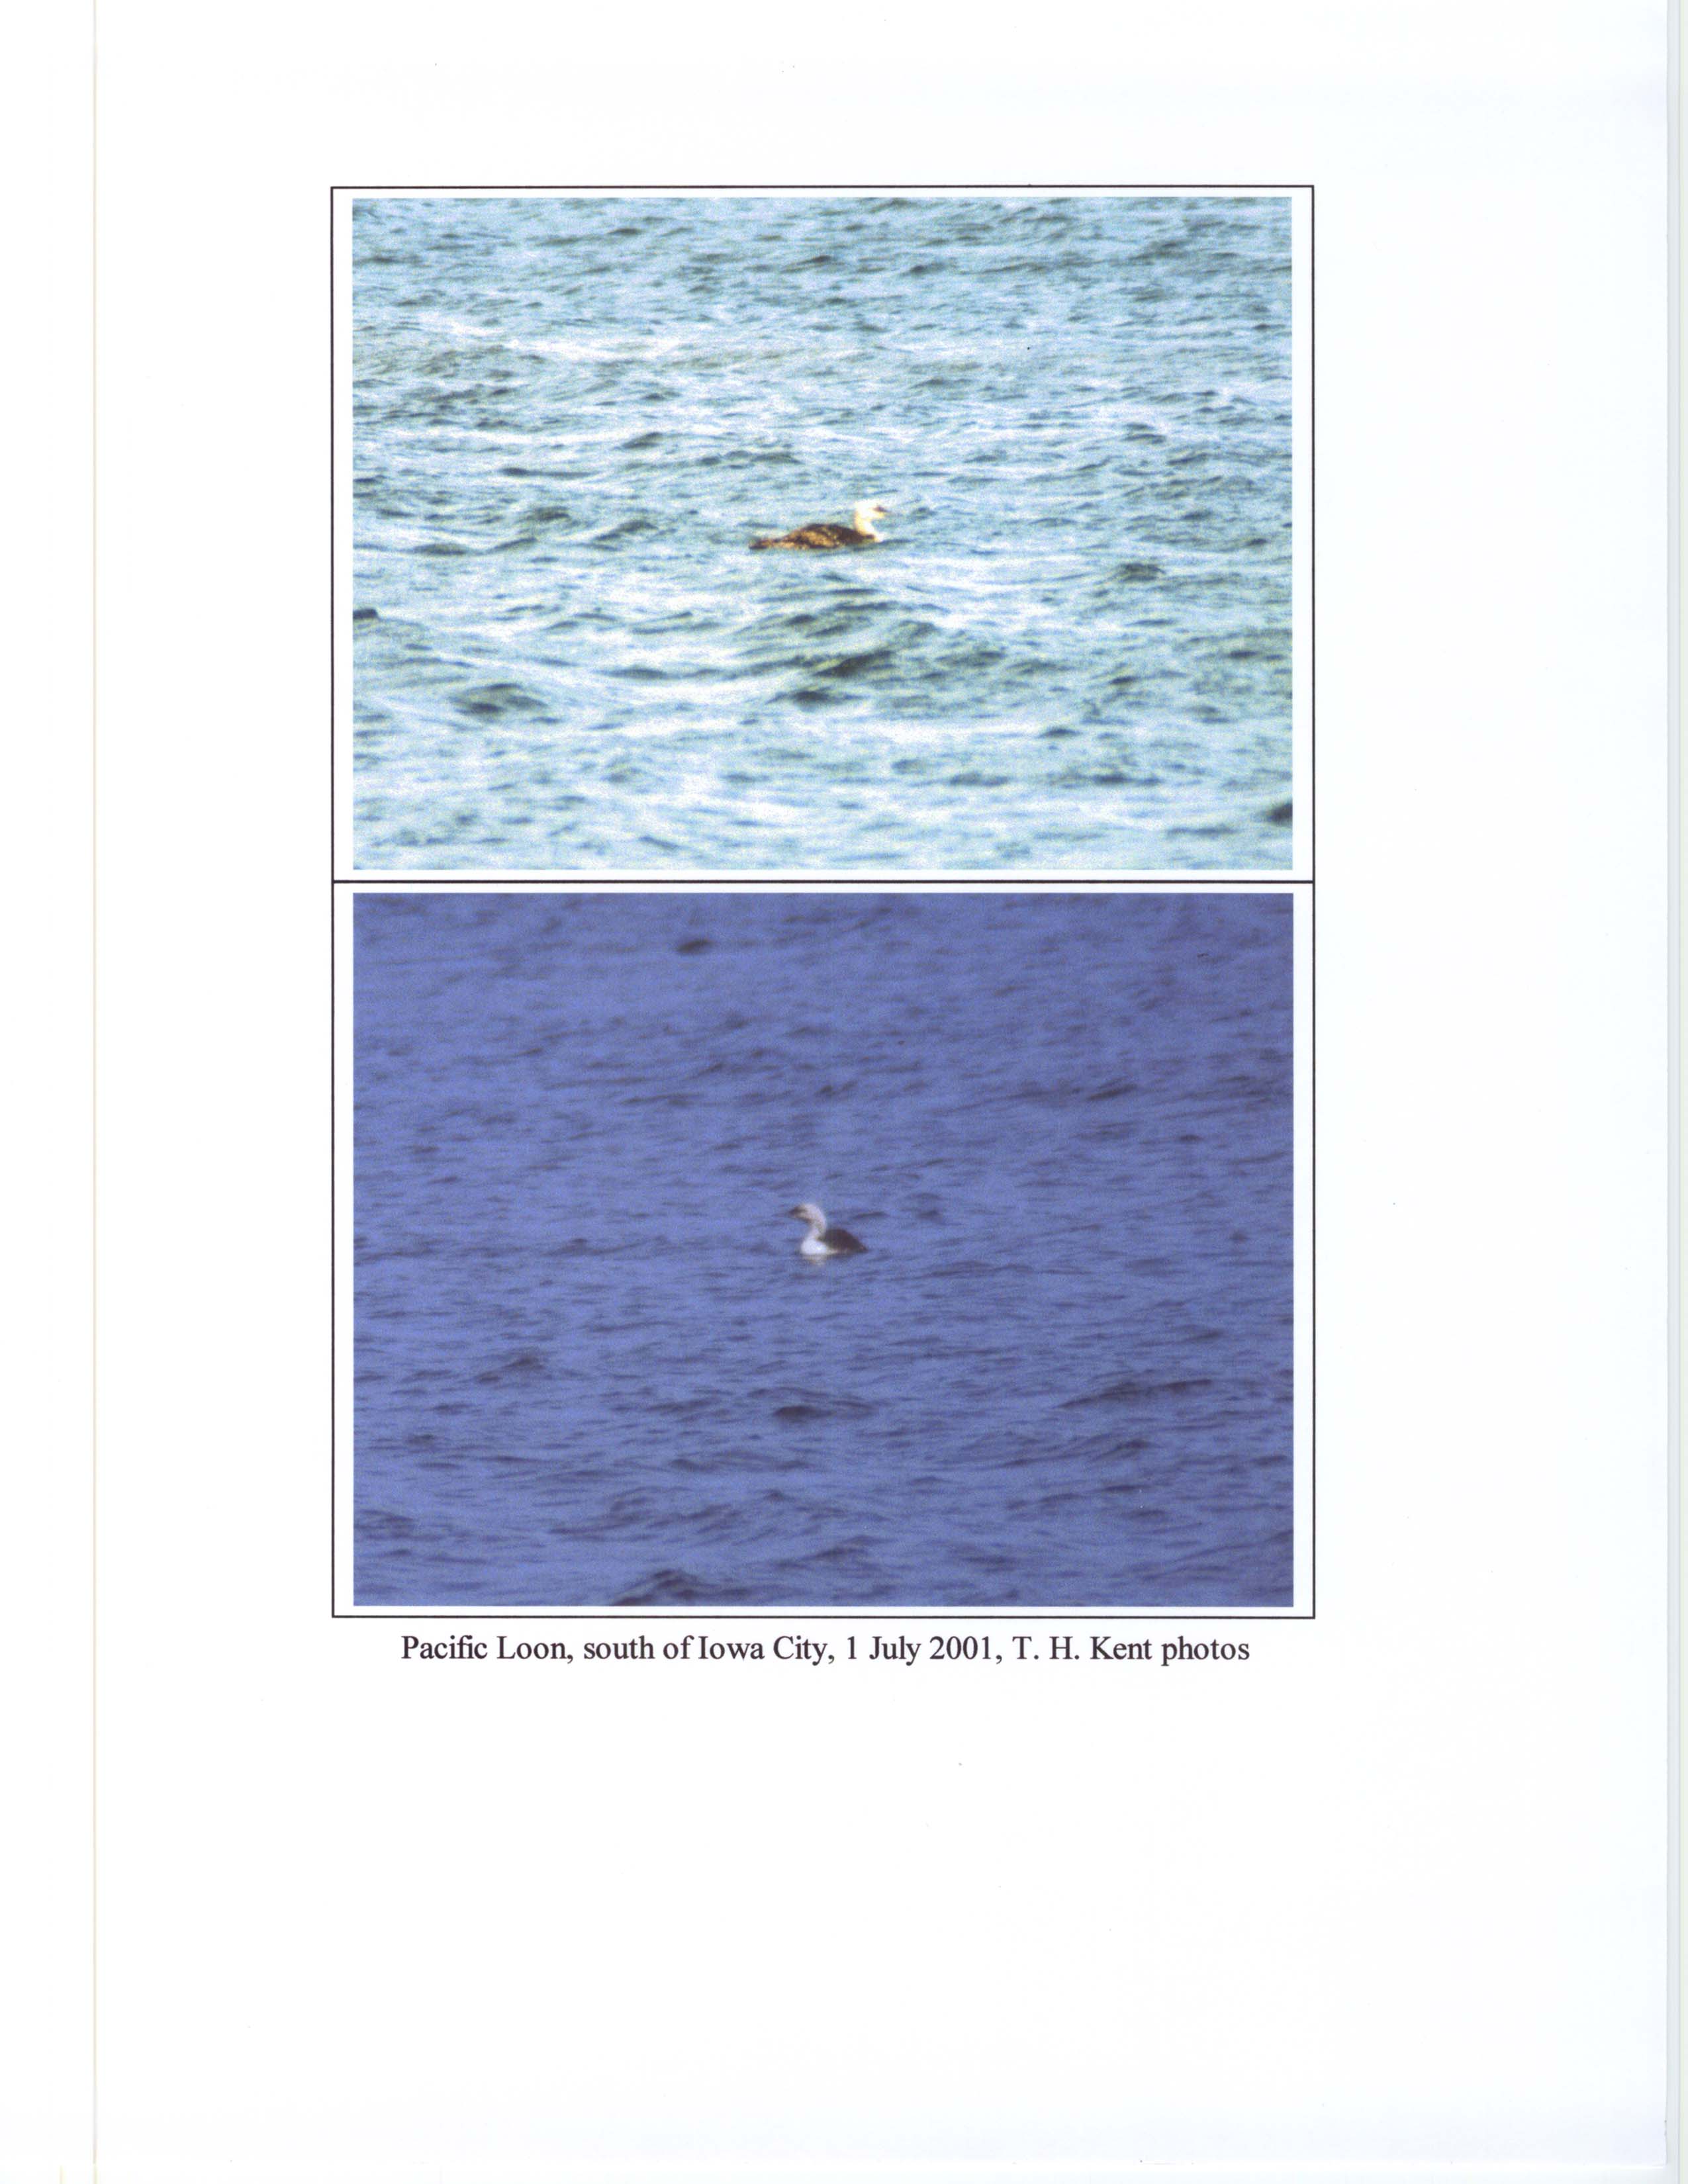 Photographs of a Pacific Loon, July 1, 2001